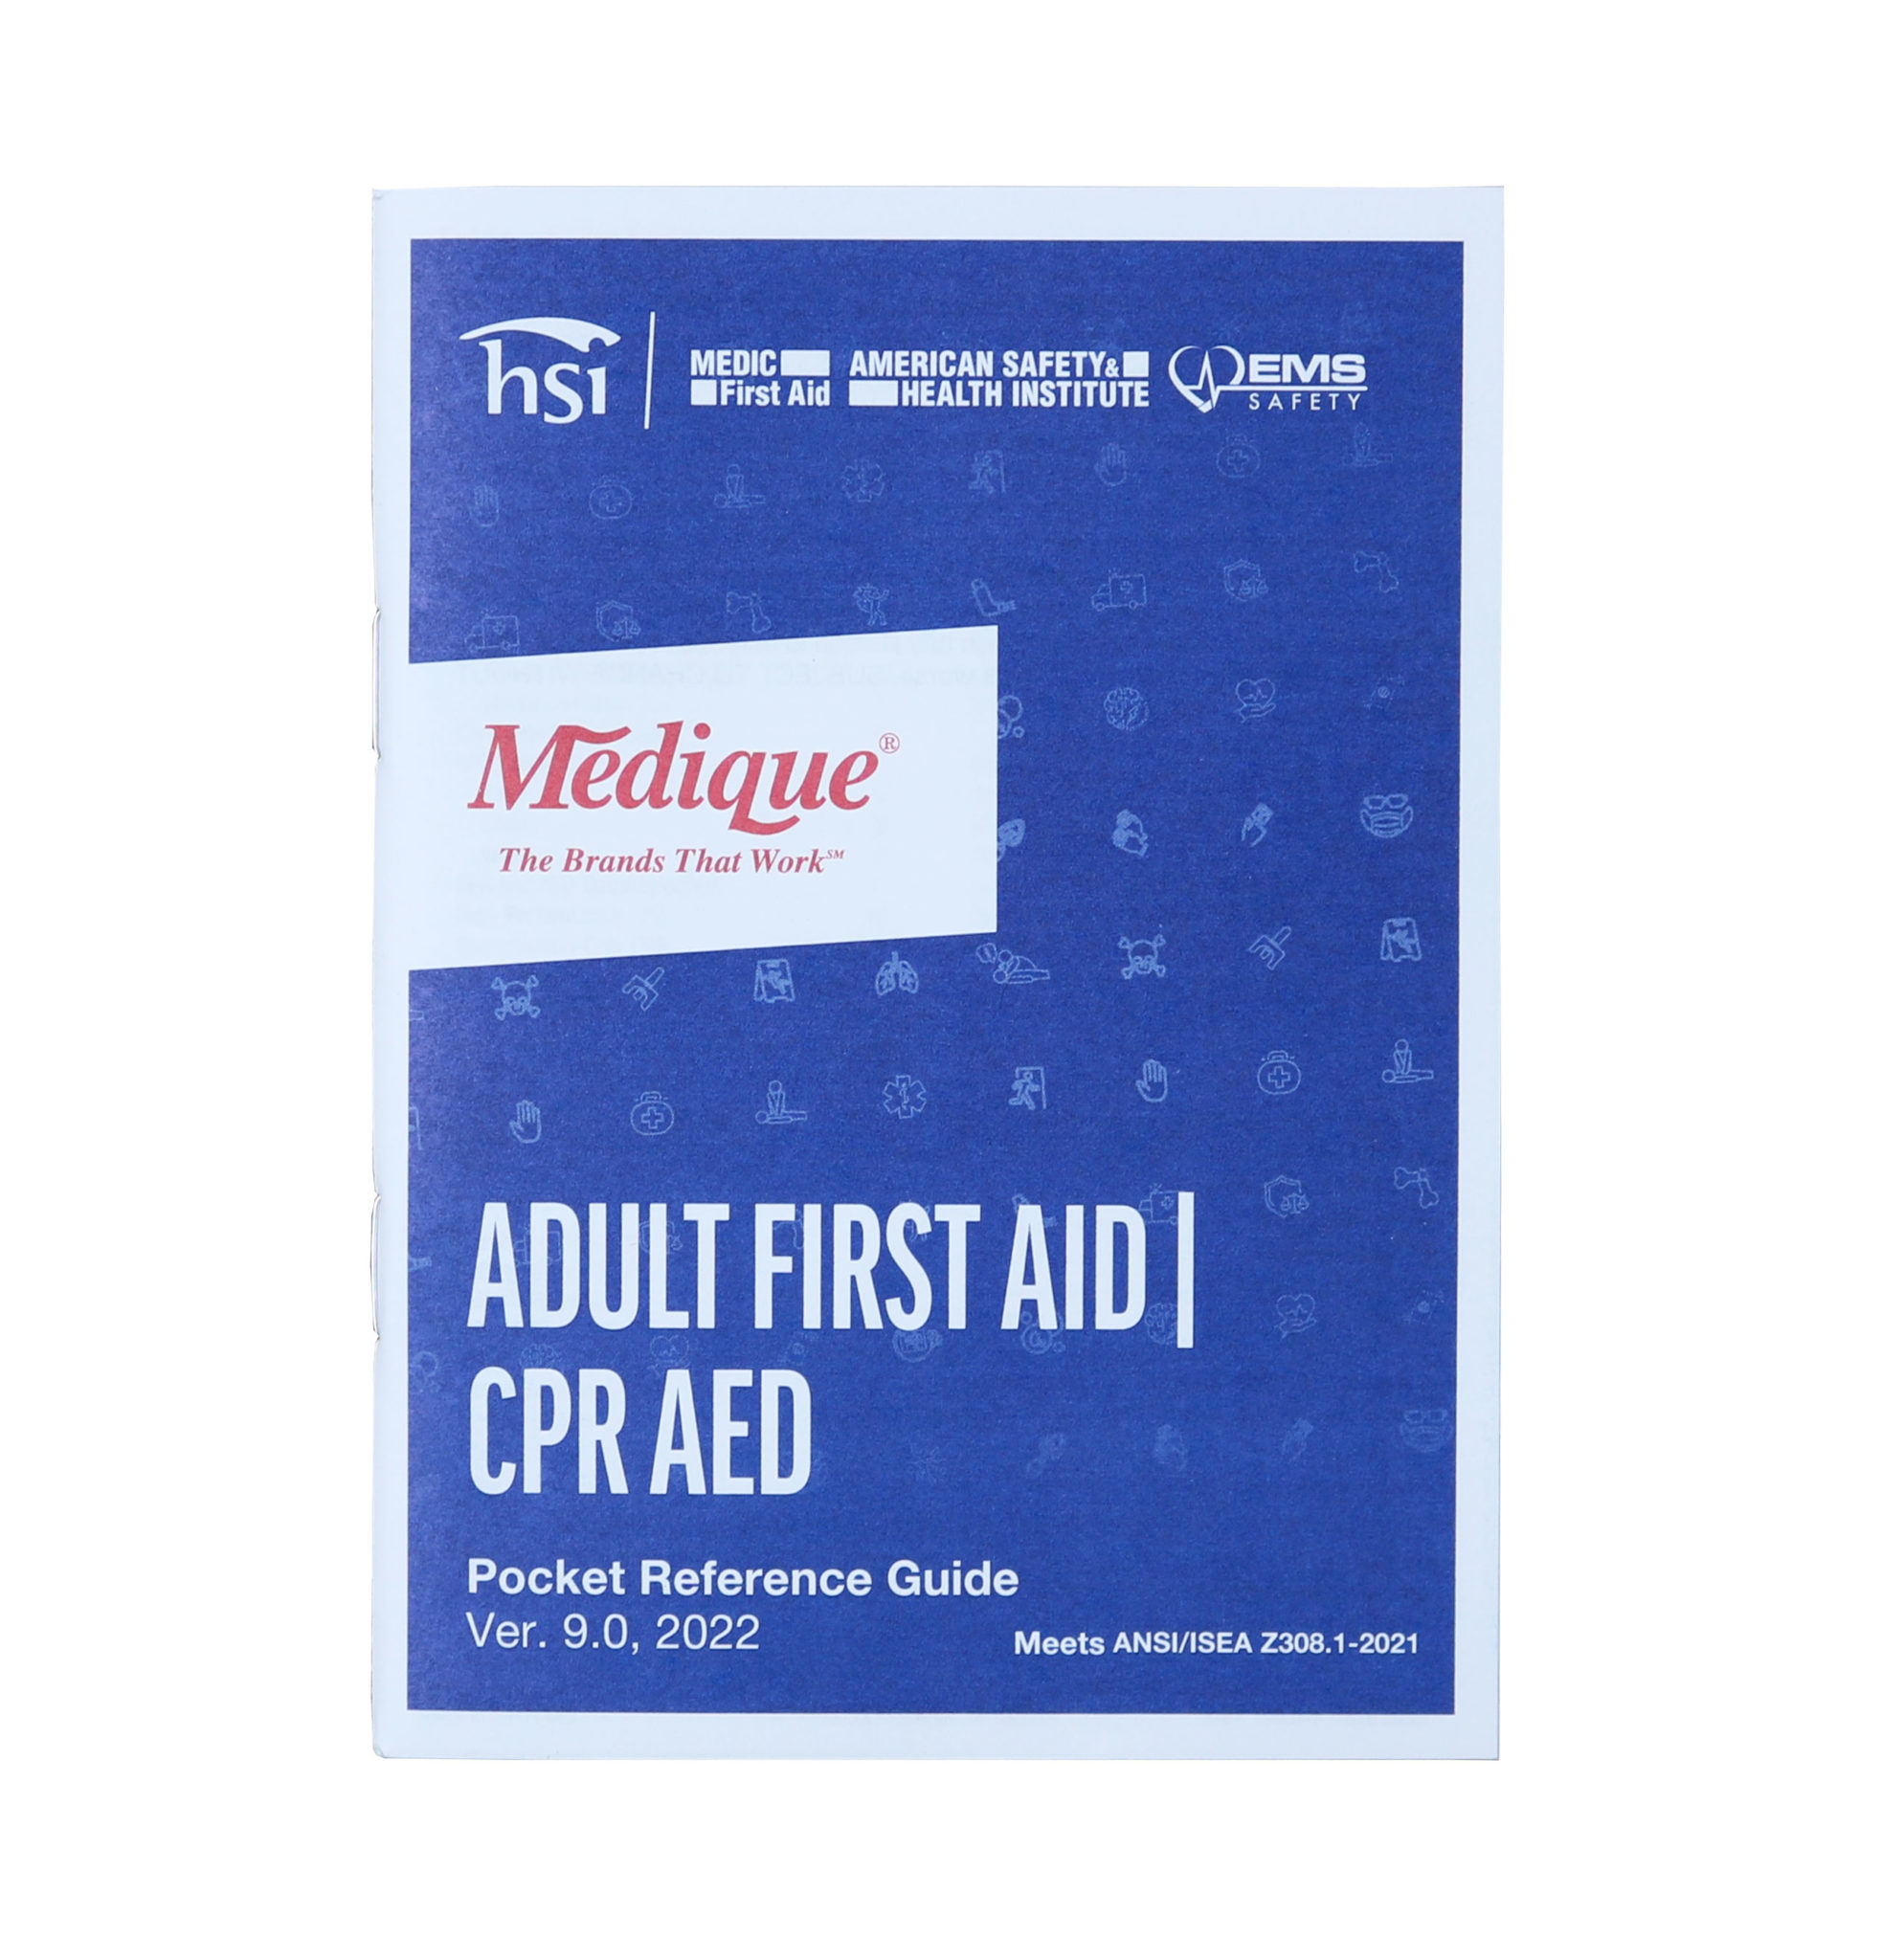 Newly Revised for ANSI Z308.1-2021 First Aid Guide